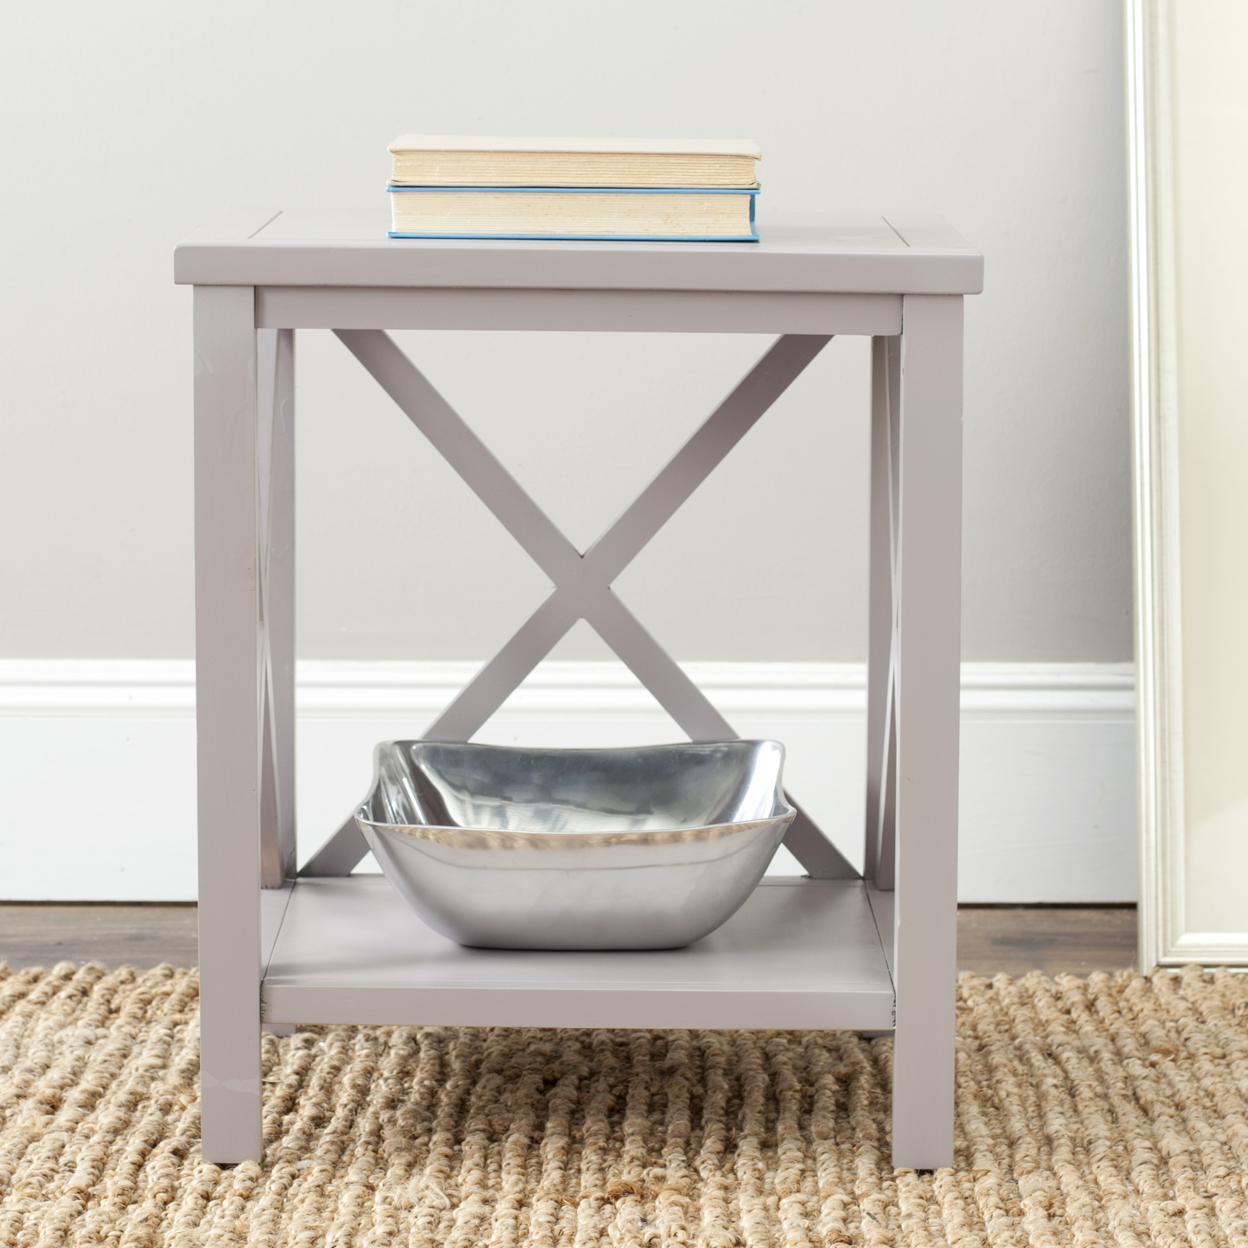 SAFAVIEH Candence Cross Back End Table Grey